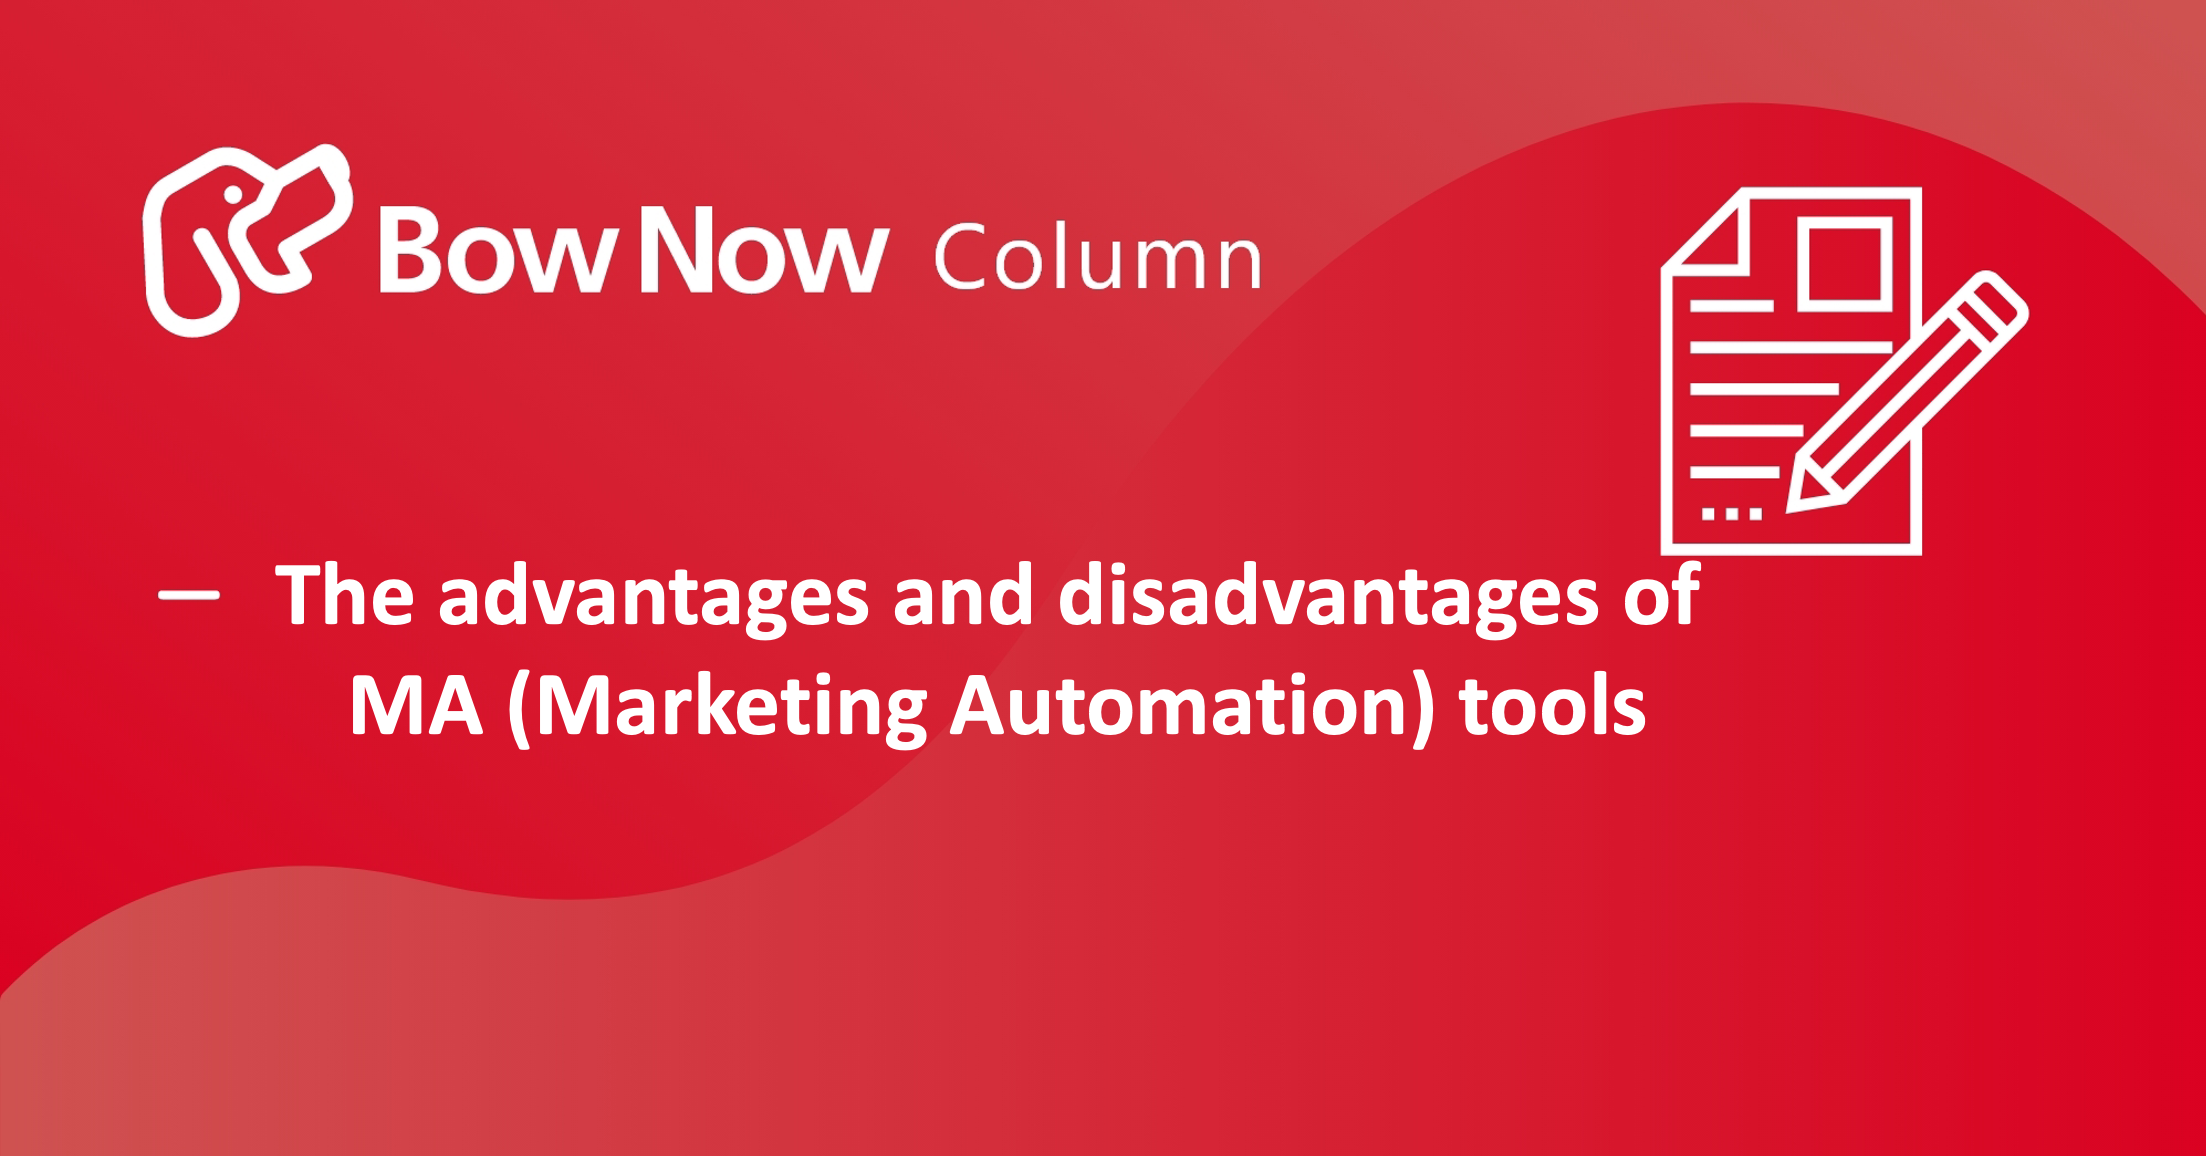 The advantages and disadvantages of MA (Marketing Automation) tools